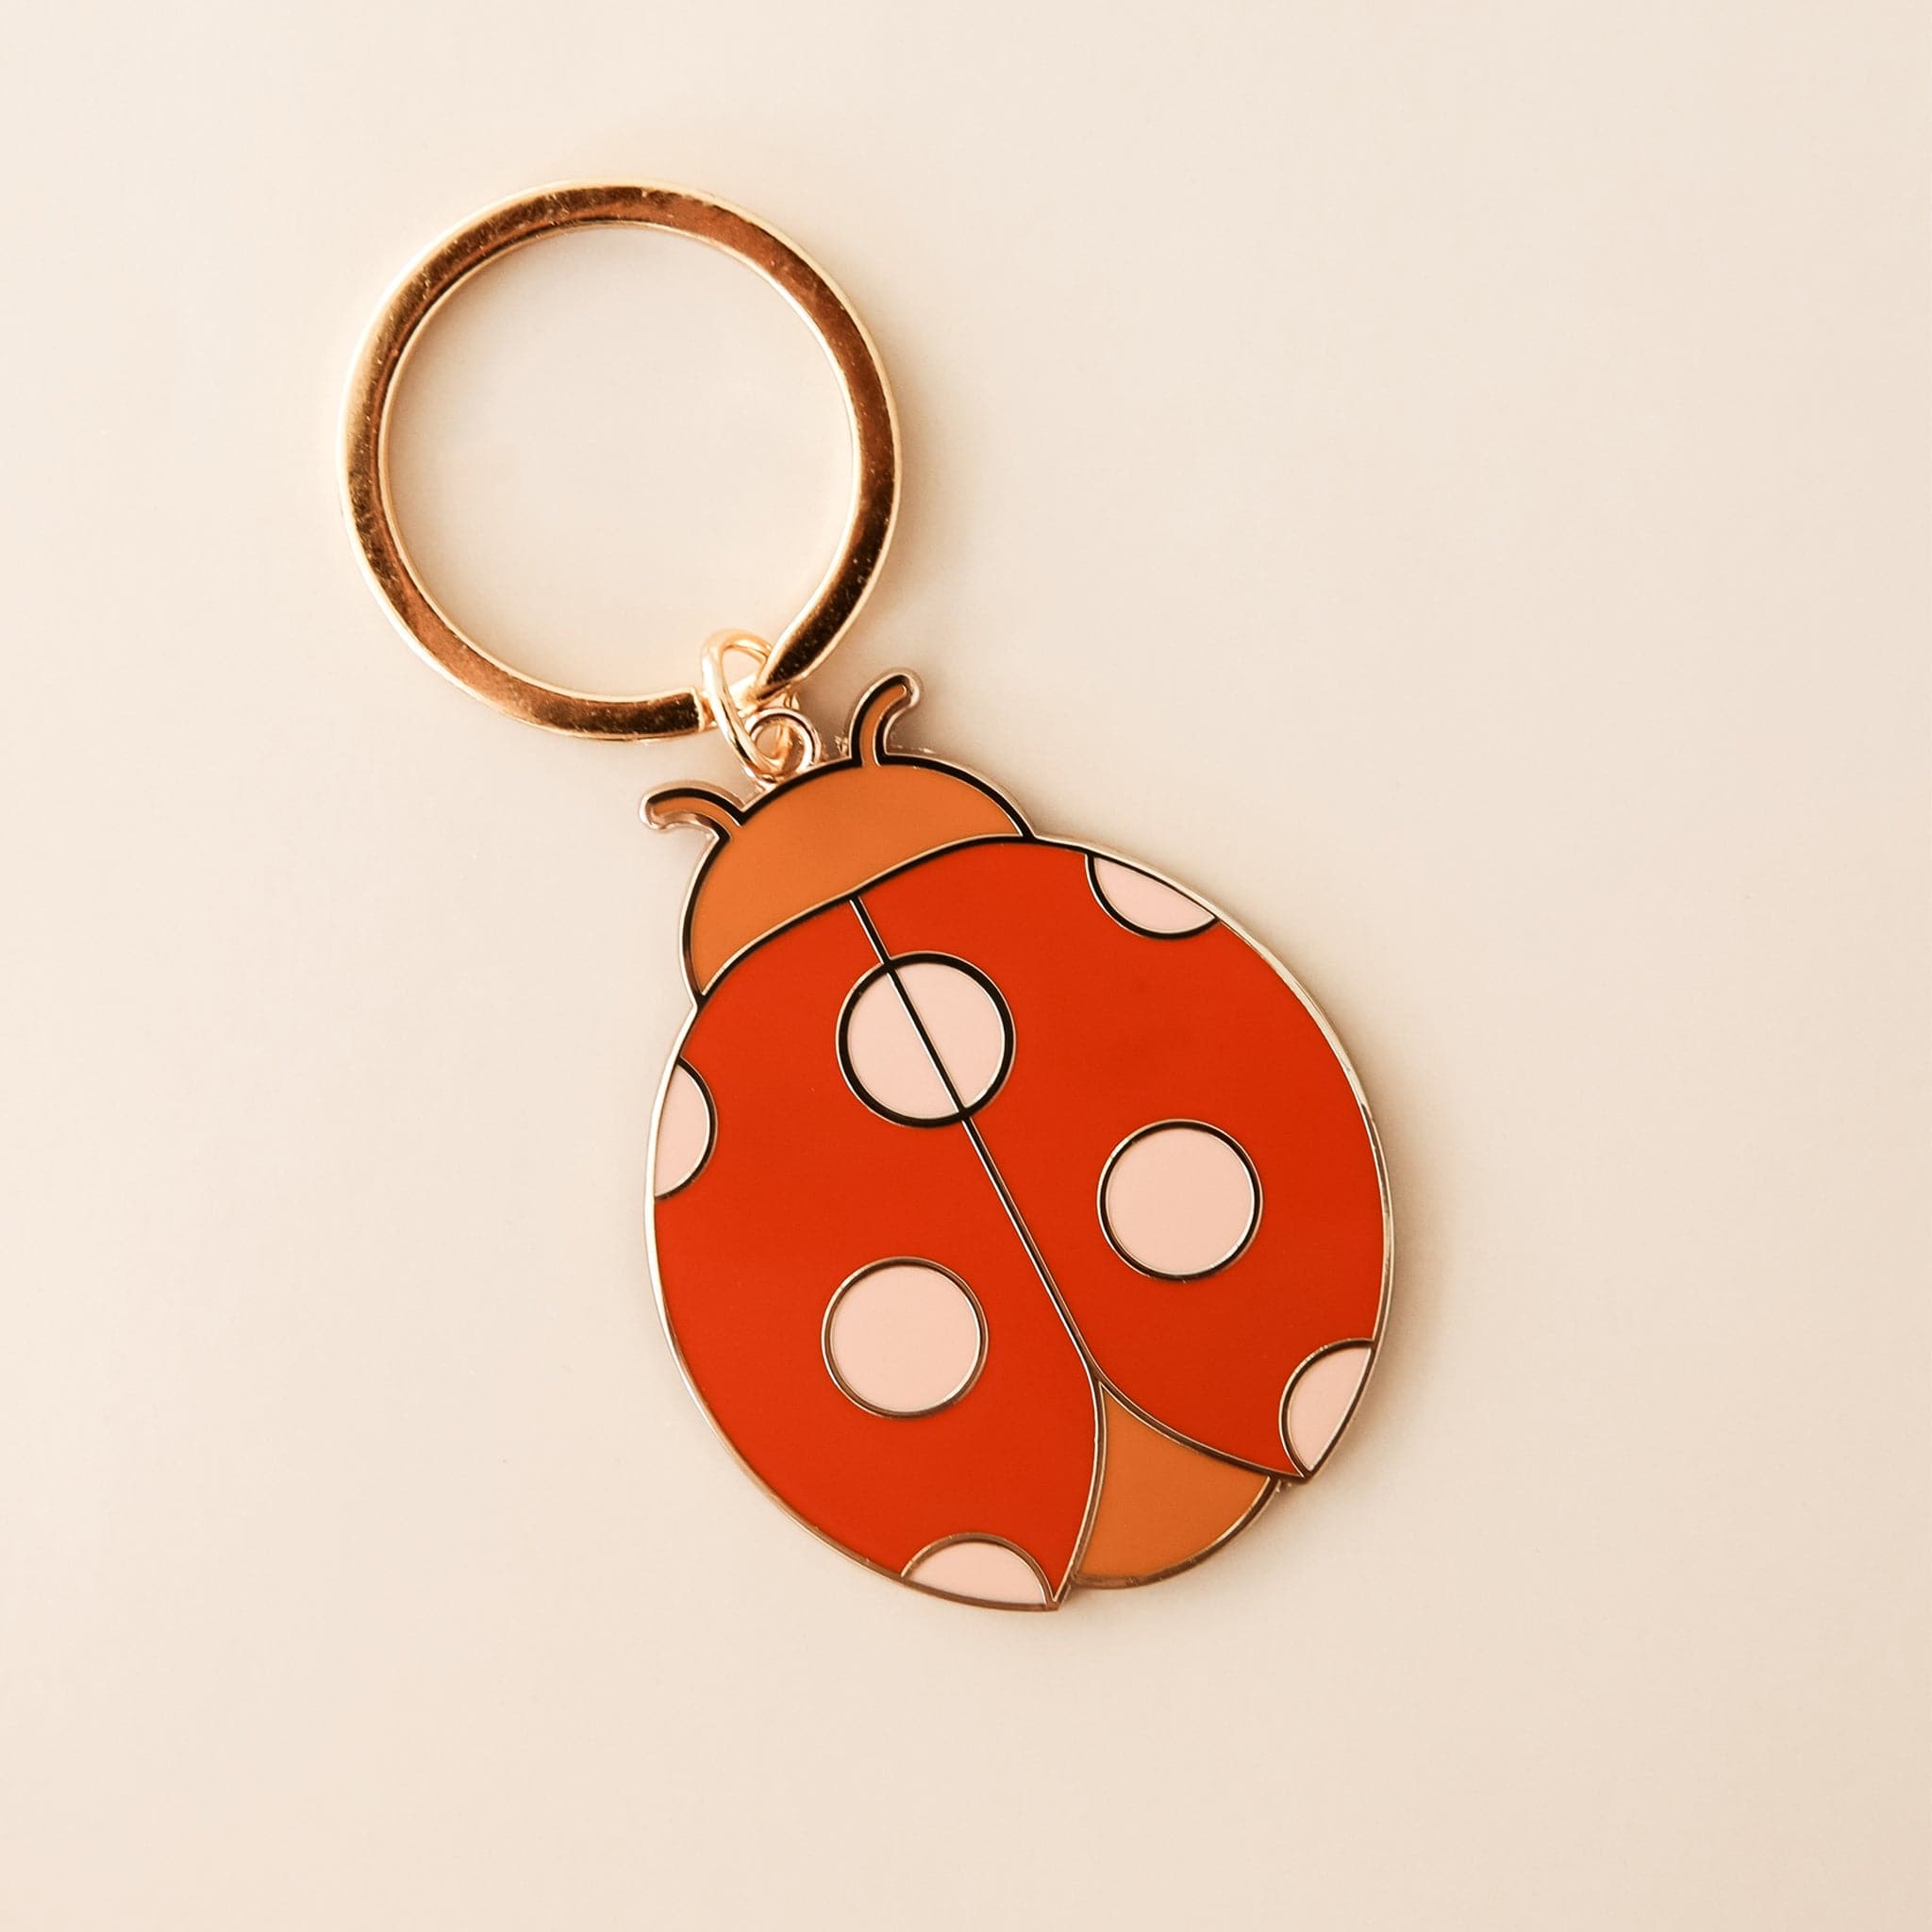 Details about   RED & BLACK LADYBUG RUBBER DUCK KEY CHAIN KC061 